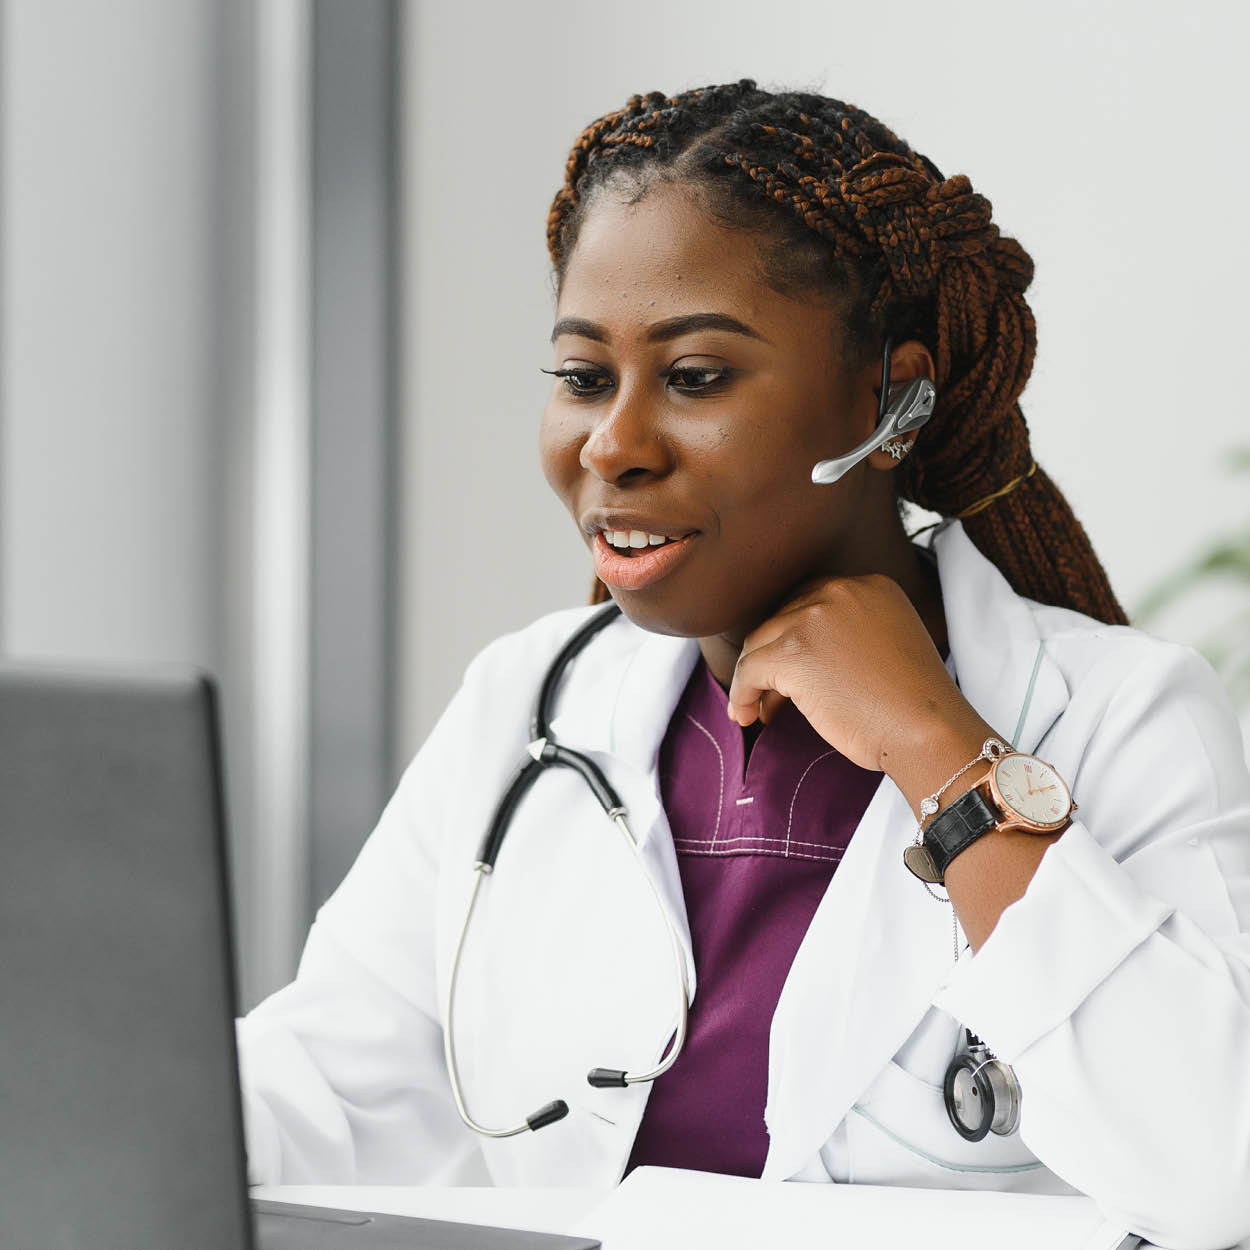 A woman doctor with a stethoscope and headset with microphone, laptop